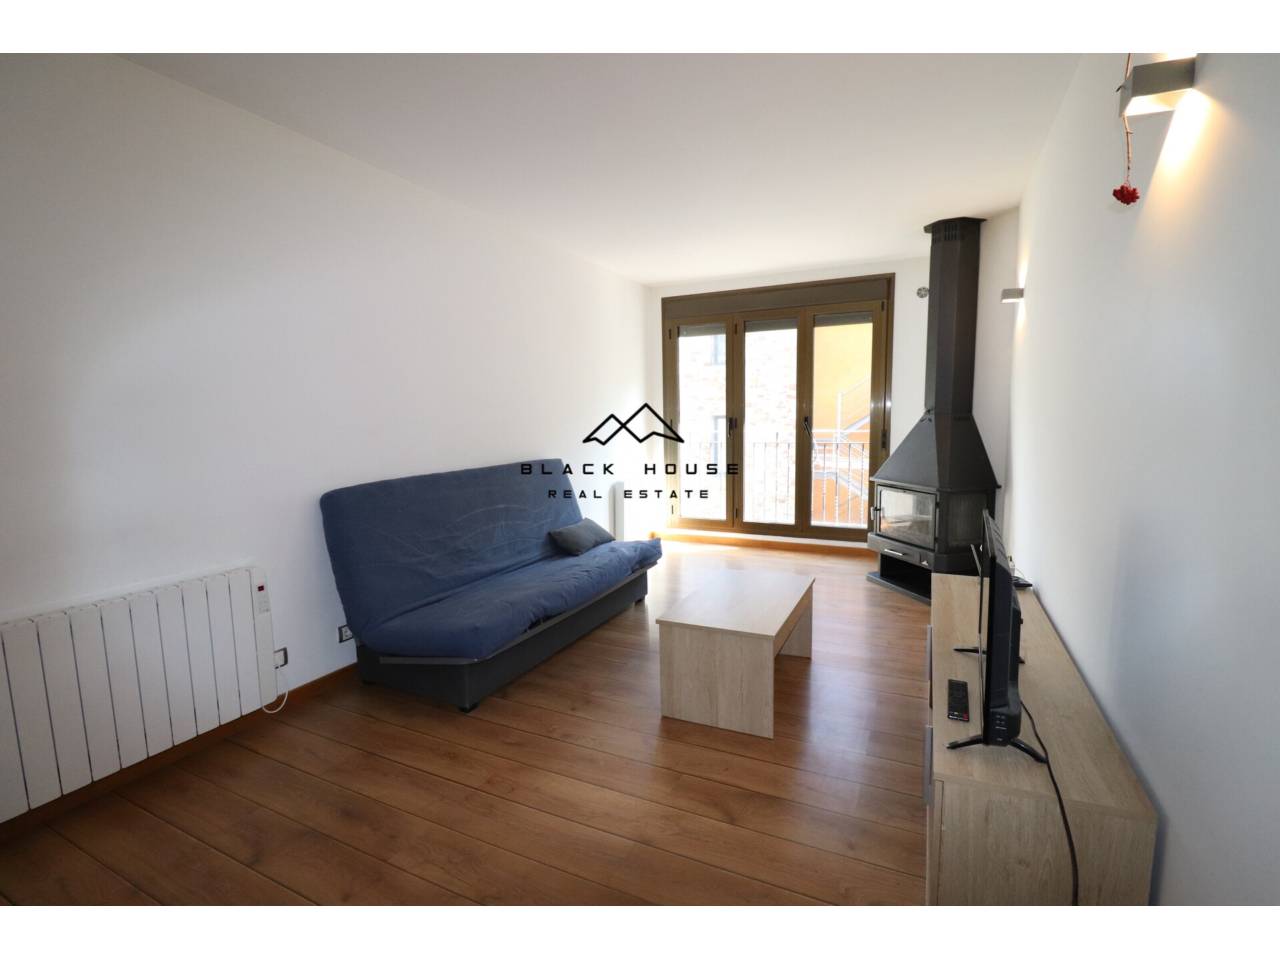 Apartment for sale located in Canillo very close to all services